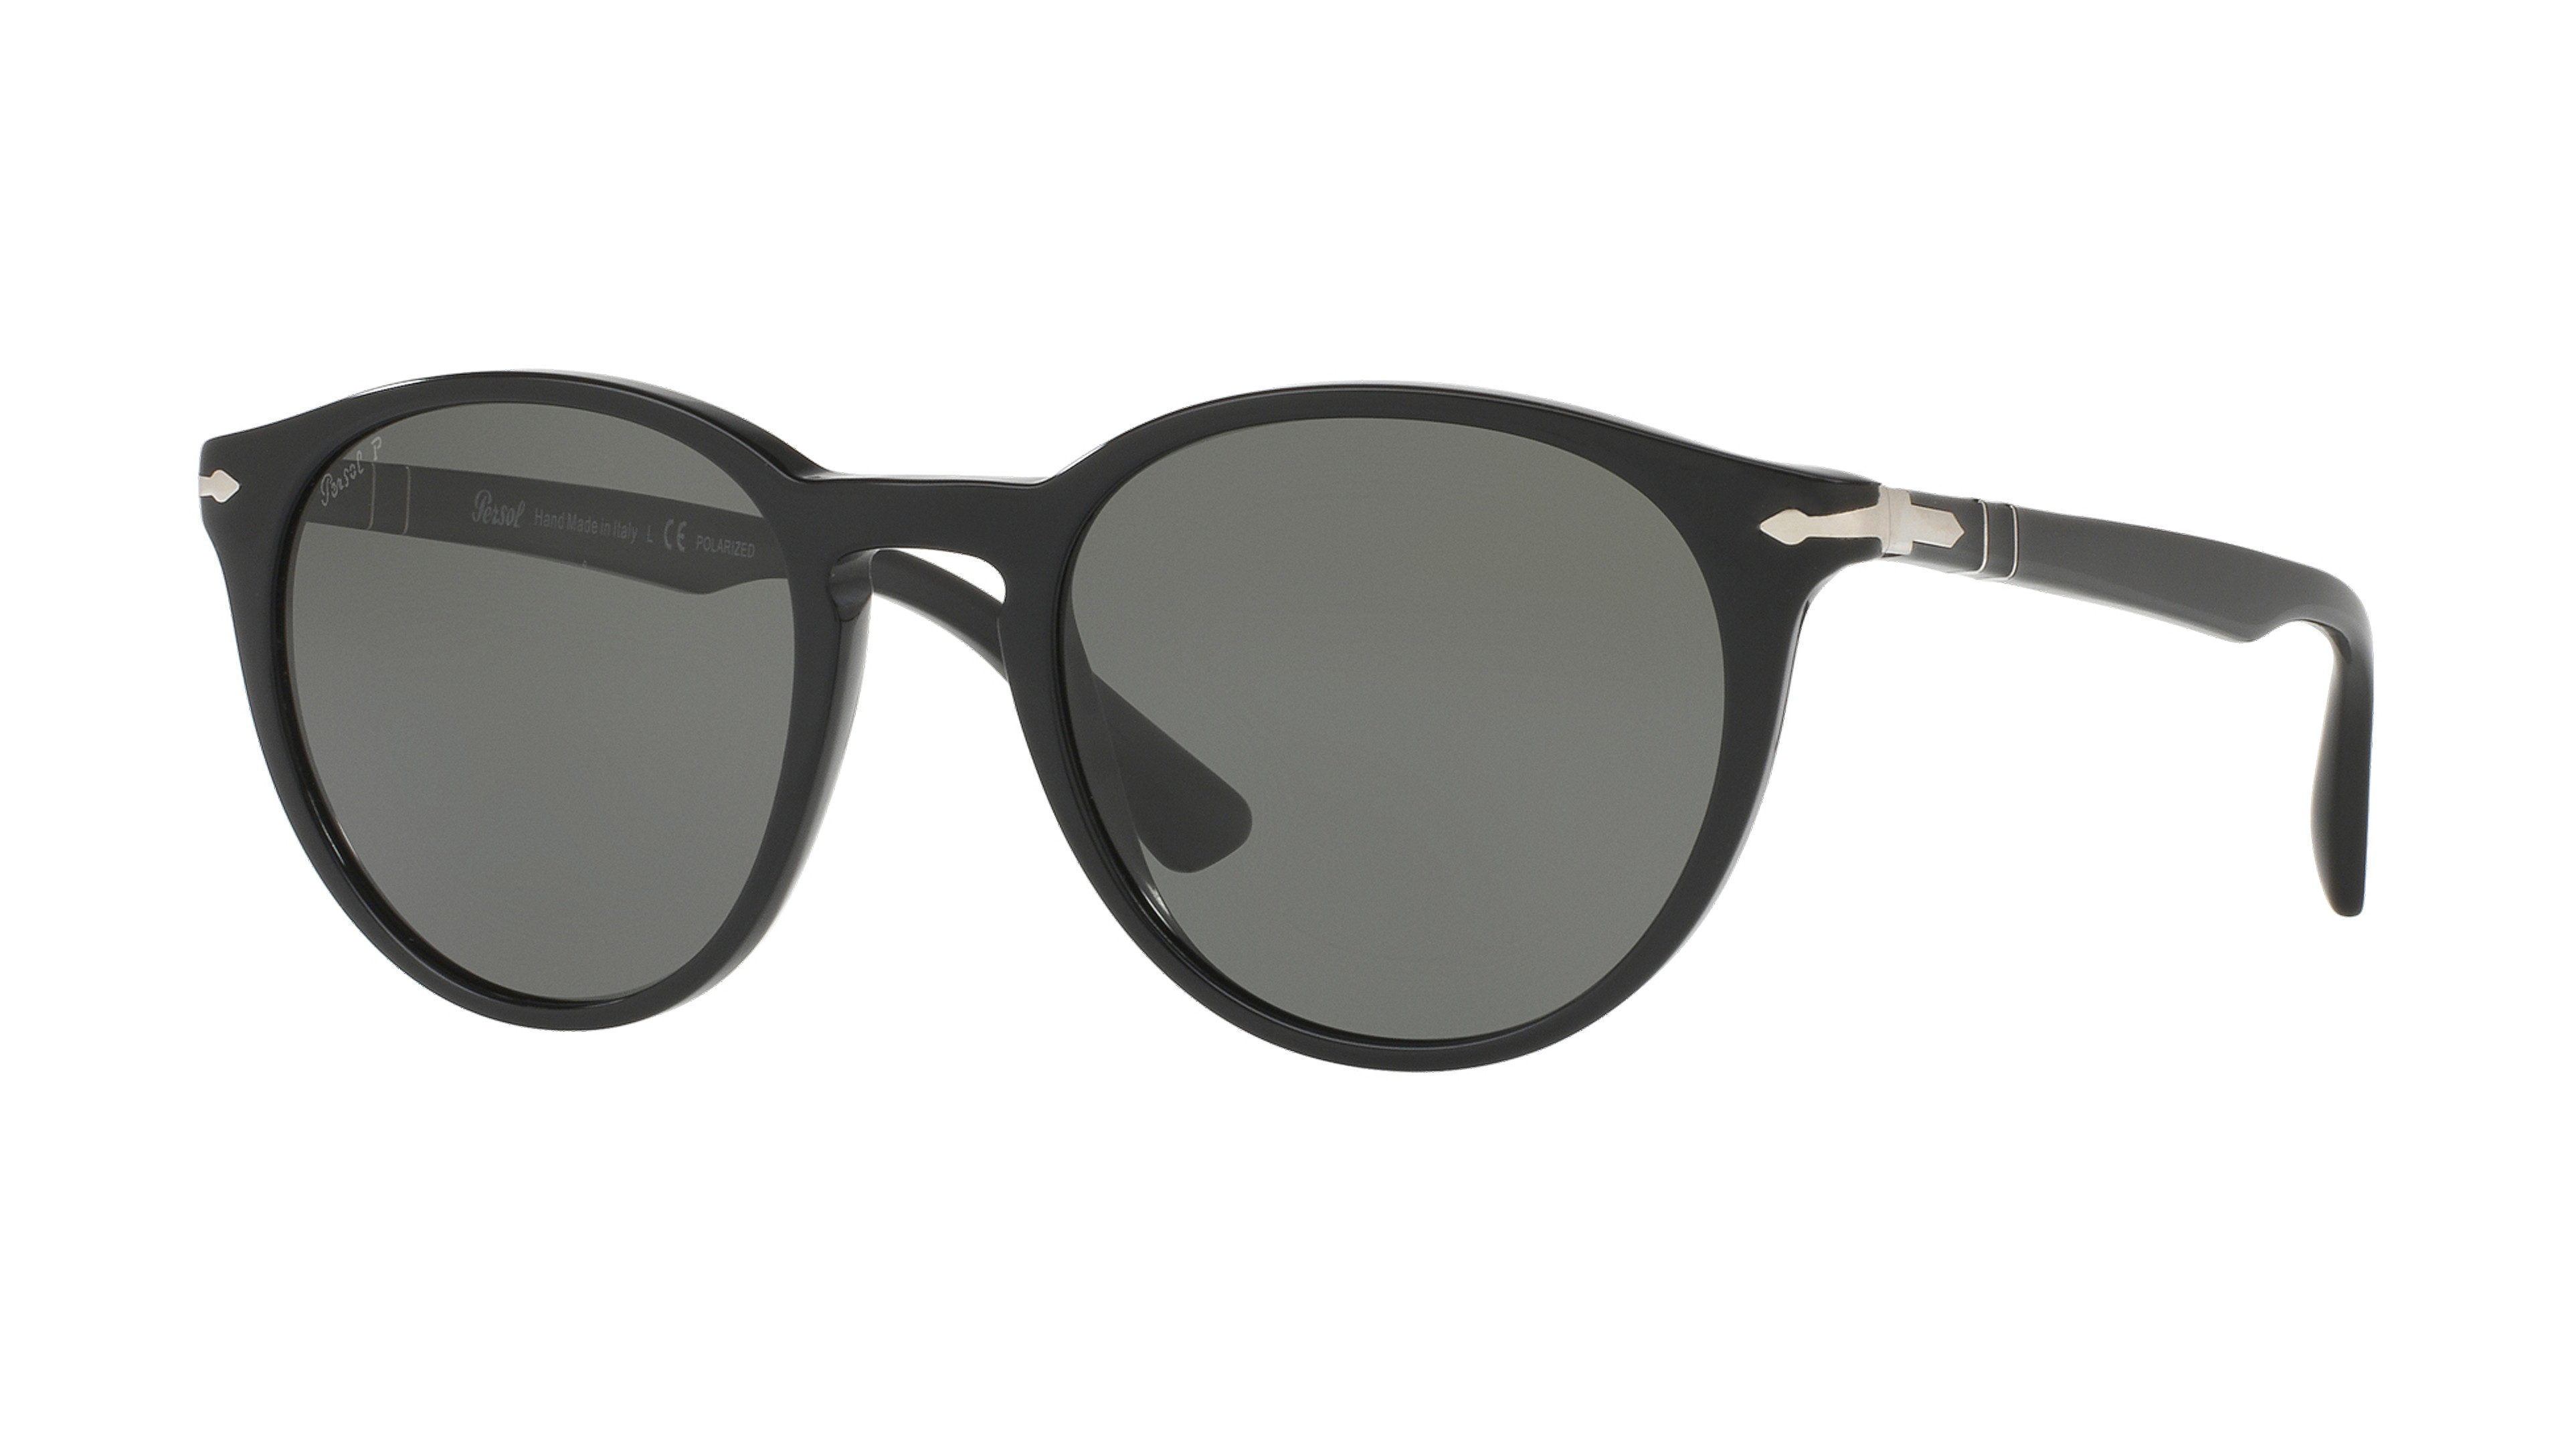 [products.image.angle_left01] Persol 0PO3152S 901458 Sonnenbrille